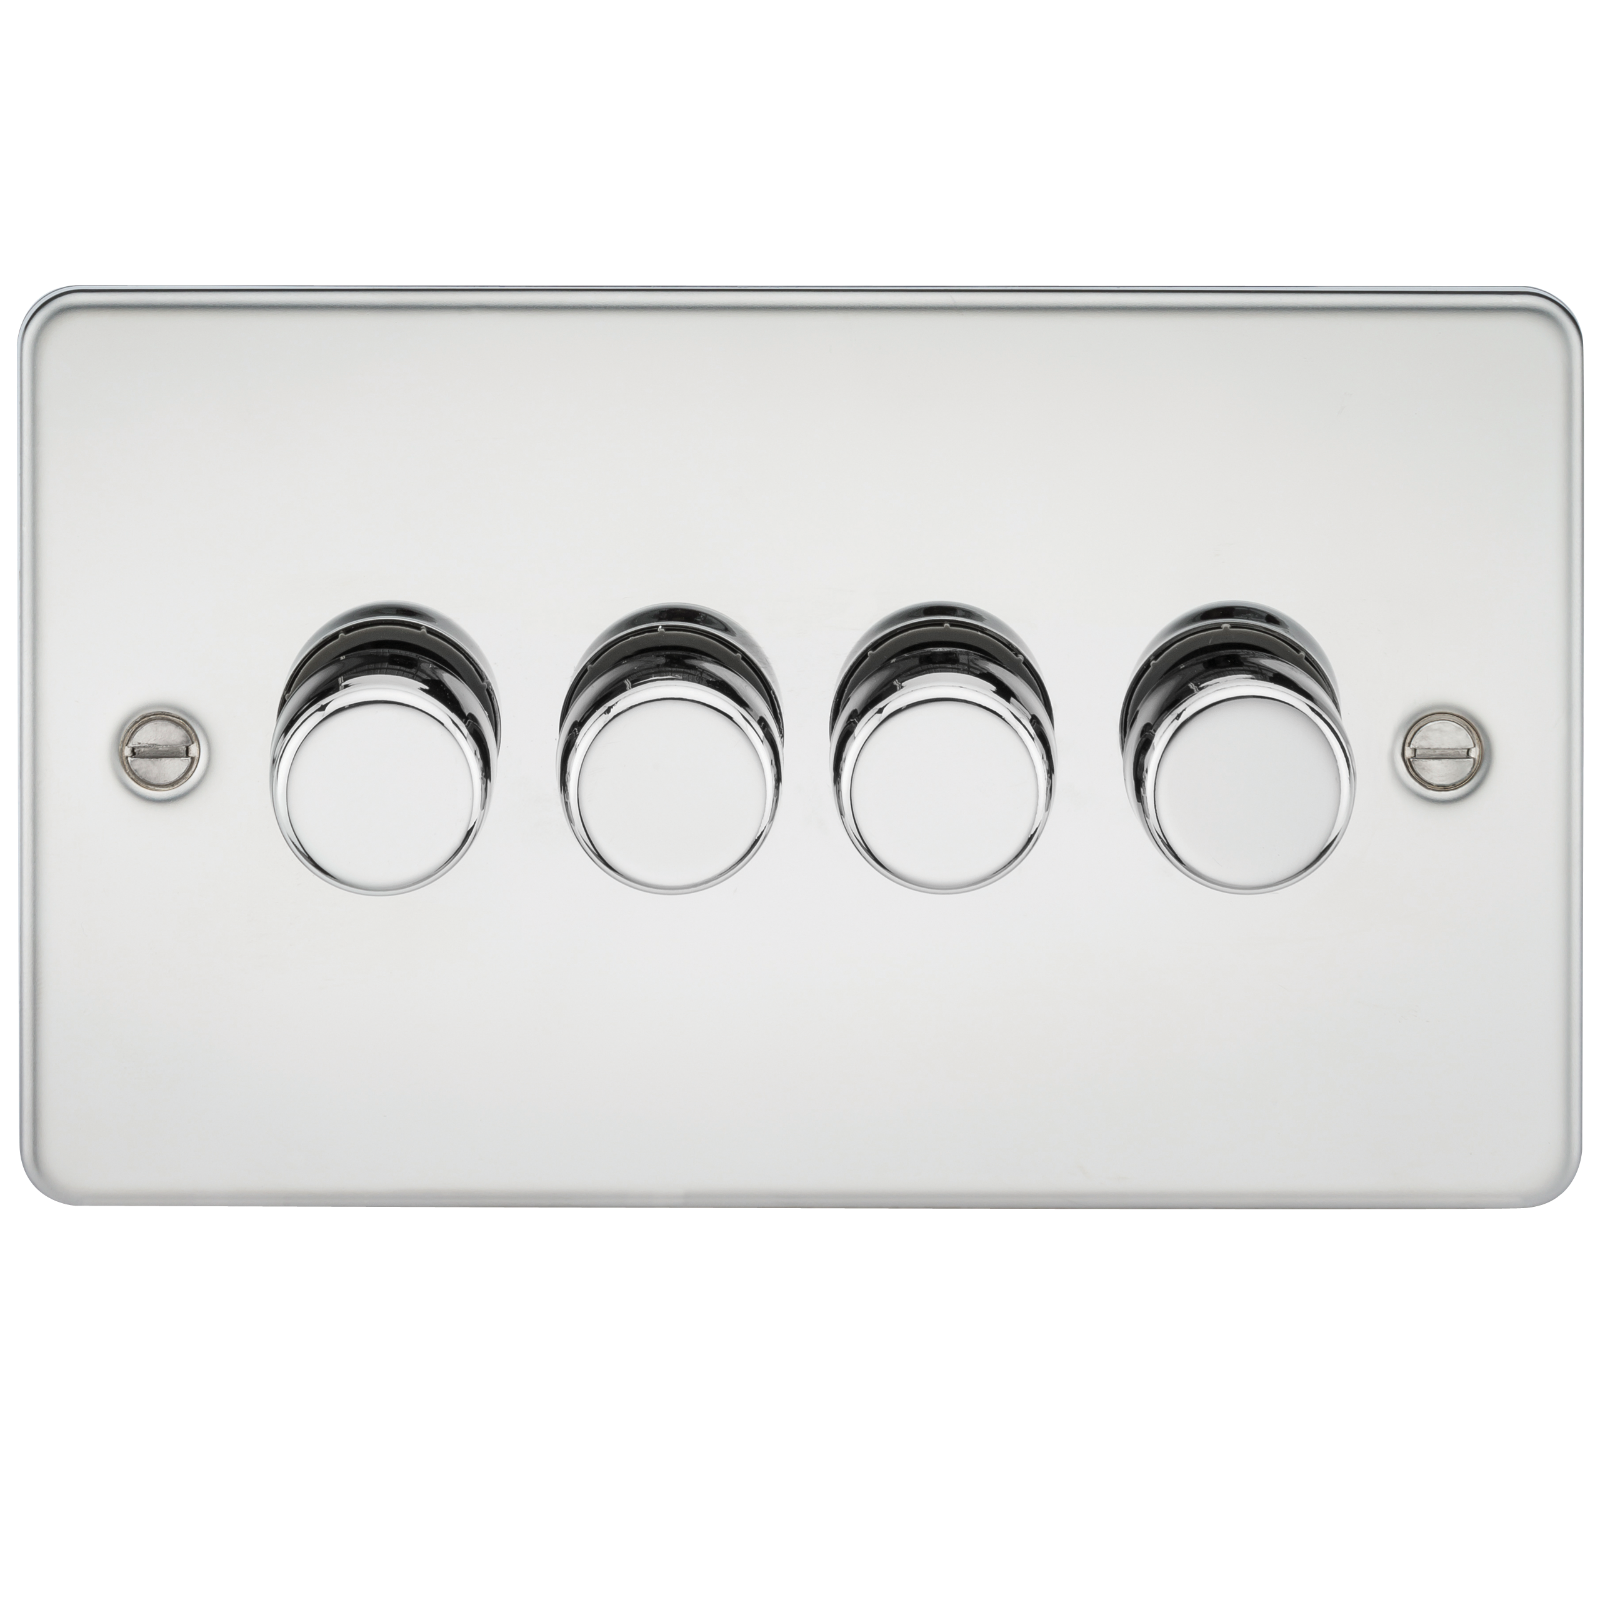 Flat Plate 4G 2 Way Dimmer 60-400W - Polished Chrome - FP2164PC 